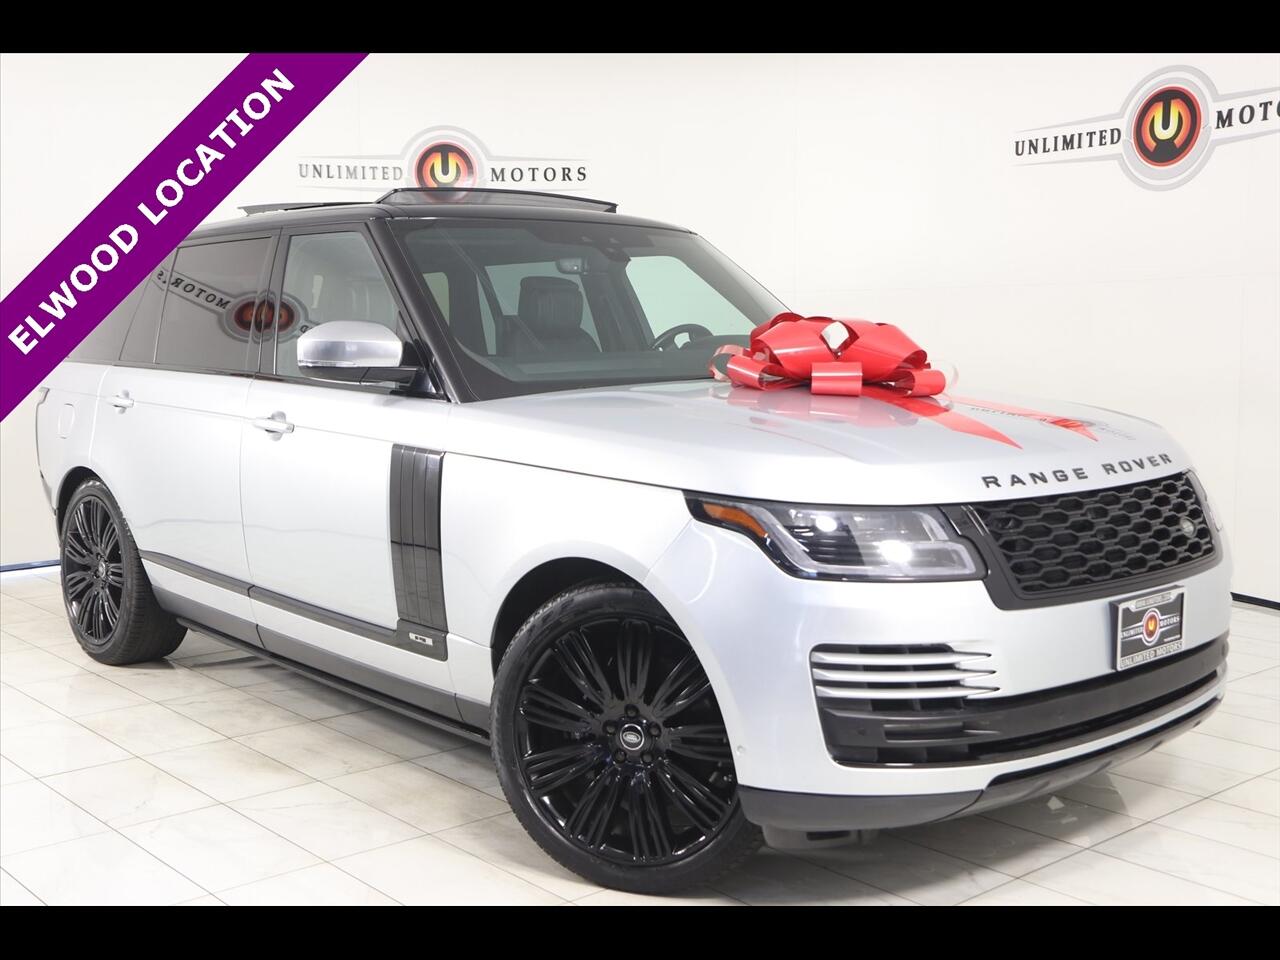 2019 Land Rover Range Rover Supercharged LWB